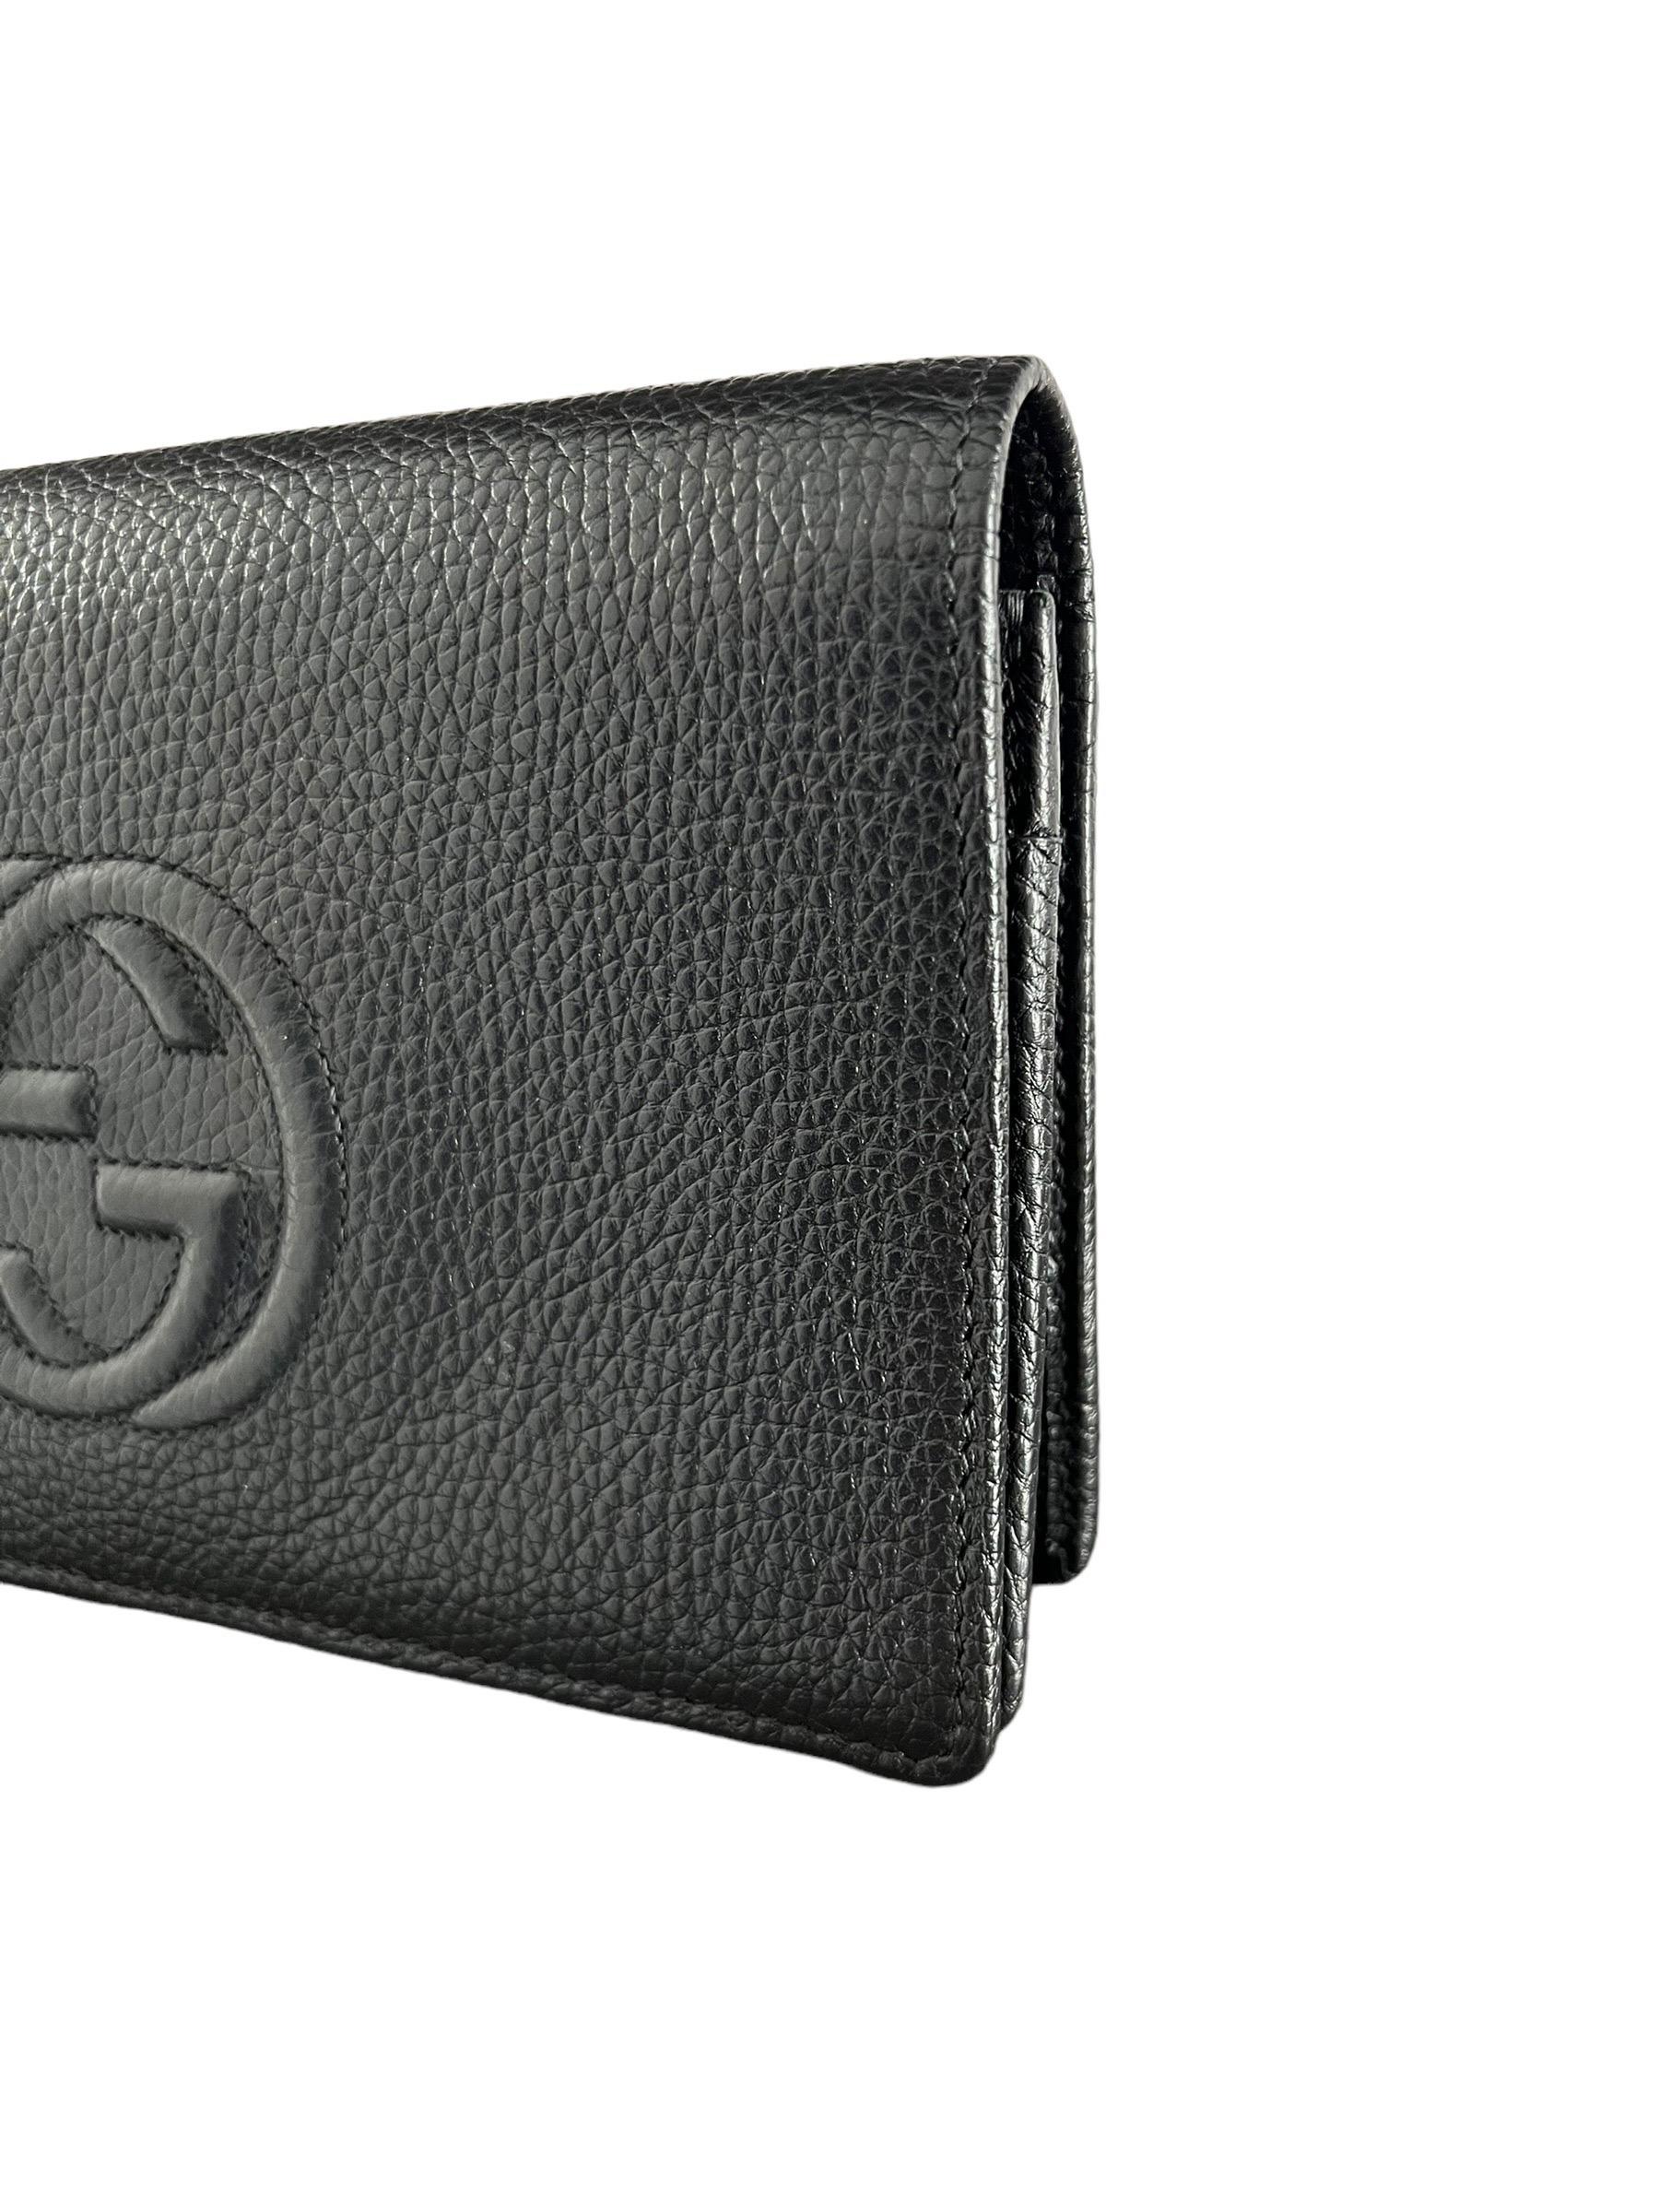 Women's or Men's Gucci Soho Wallet On Chain Nera Borsa A Tracolla  For Sale